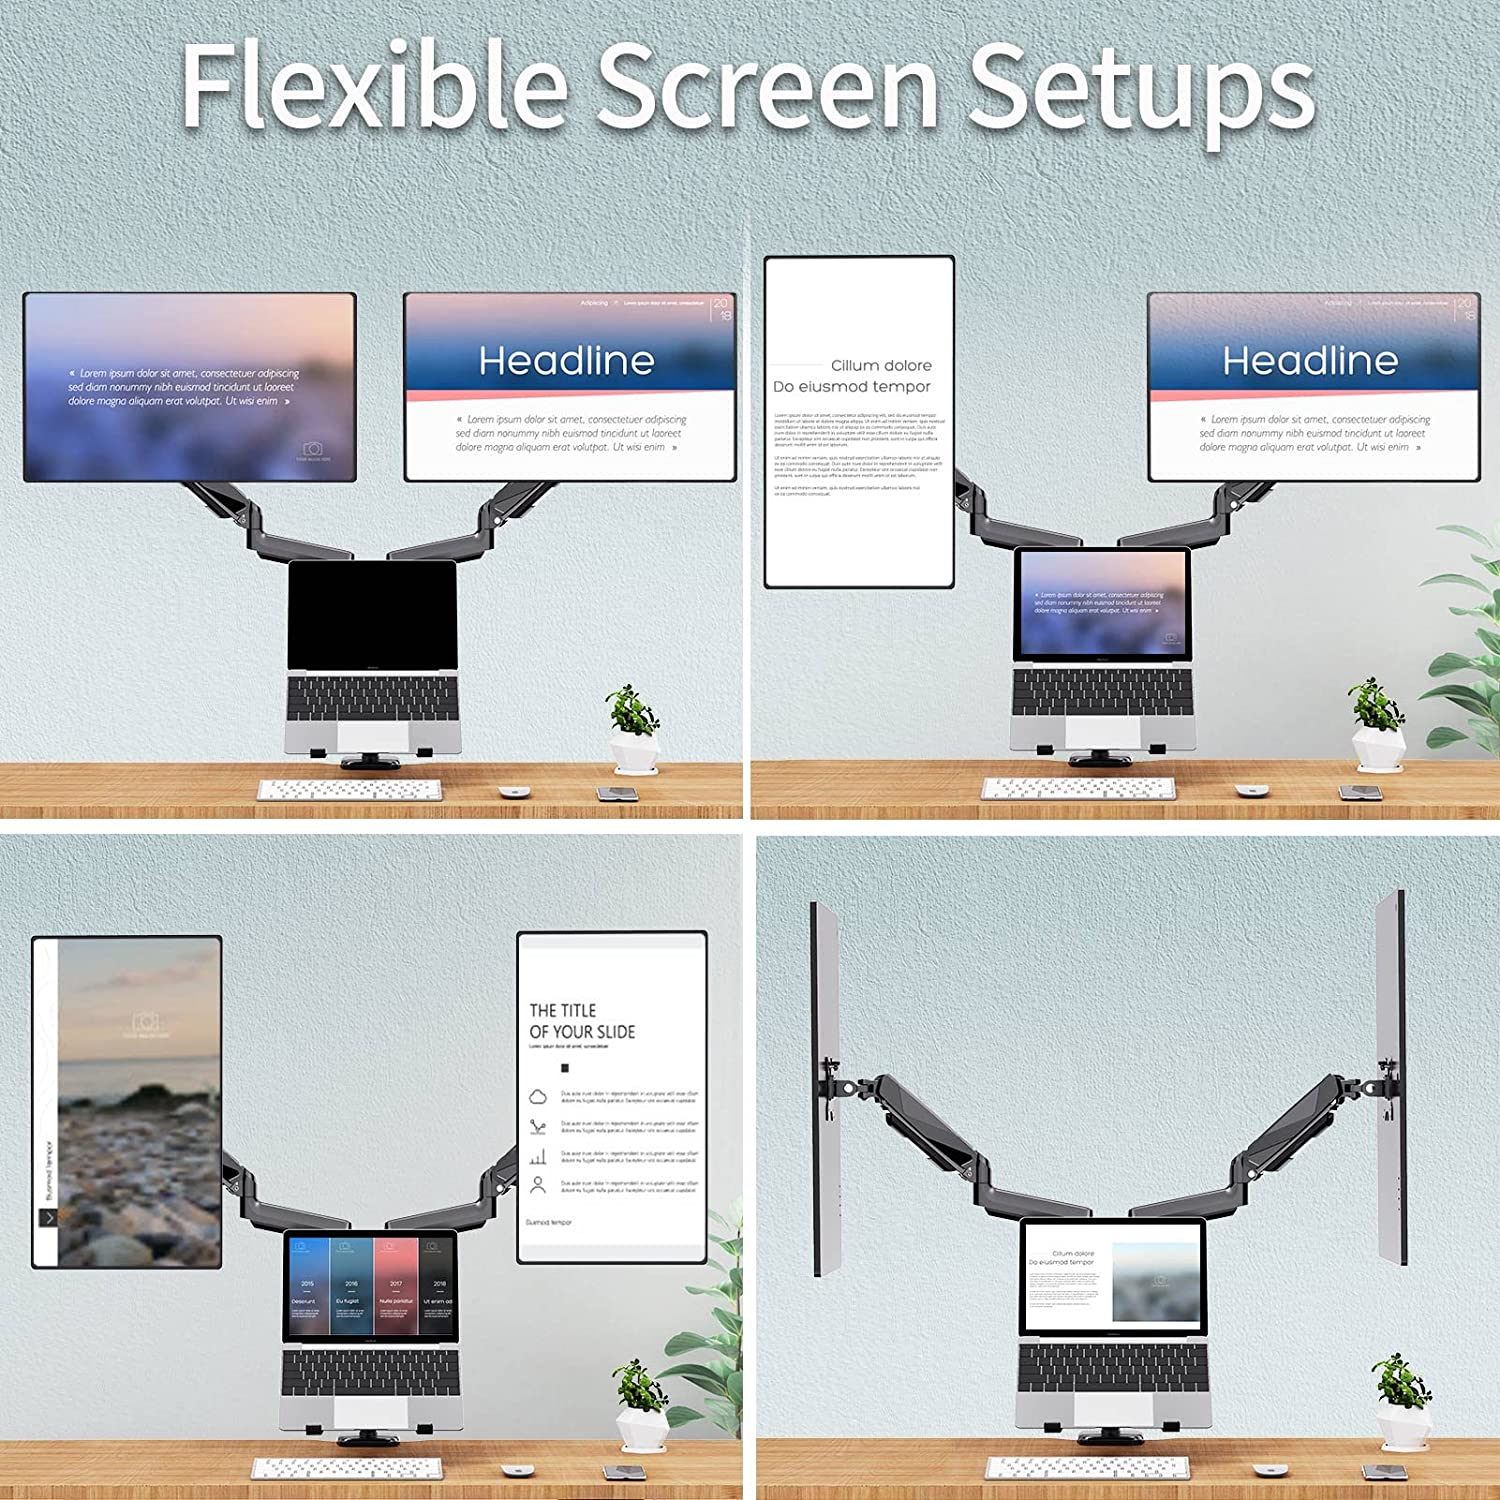 Offers flexible and multiple screen setups for monitors and laptop